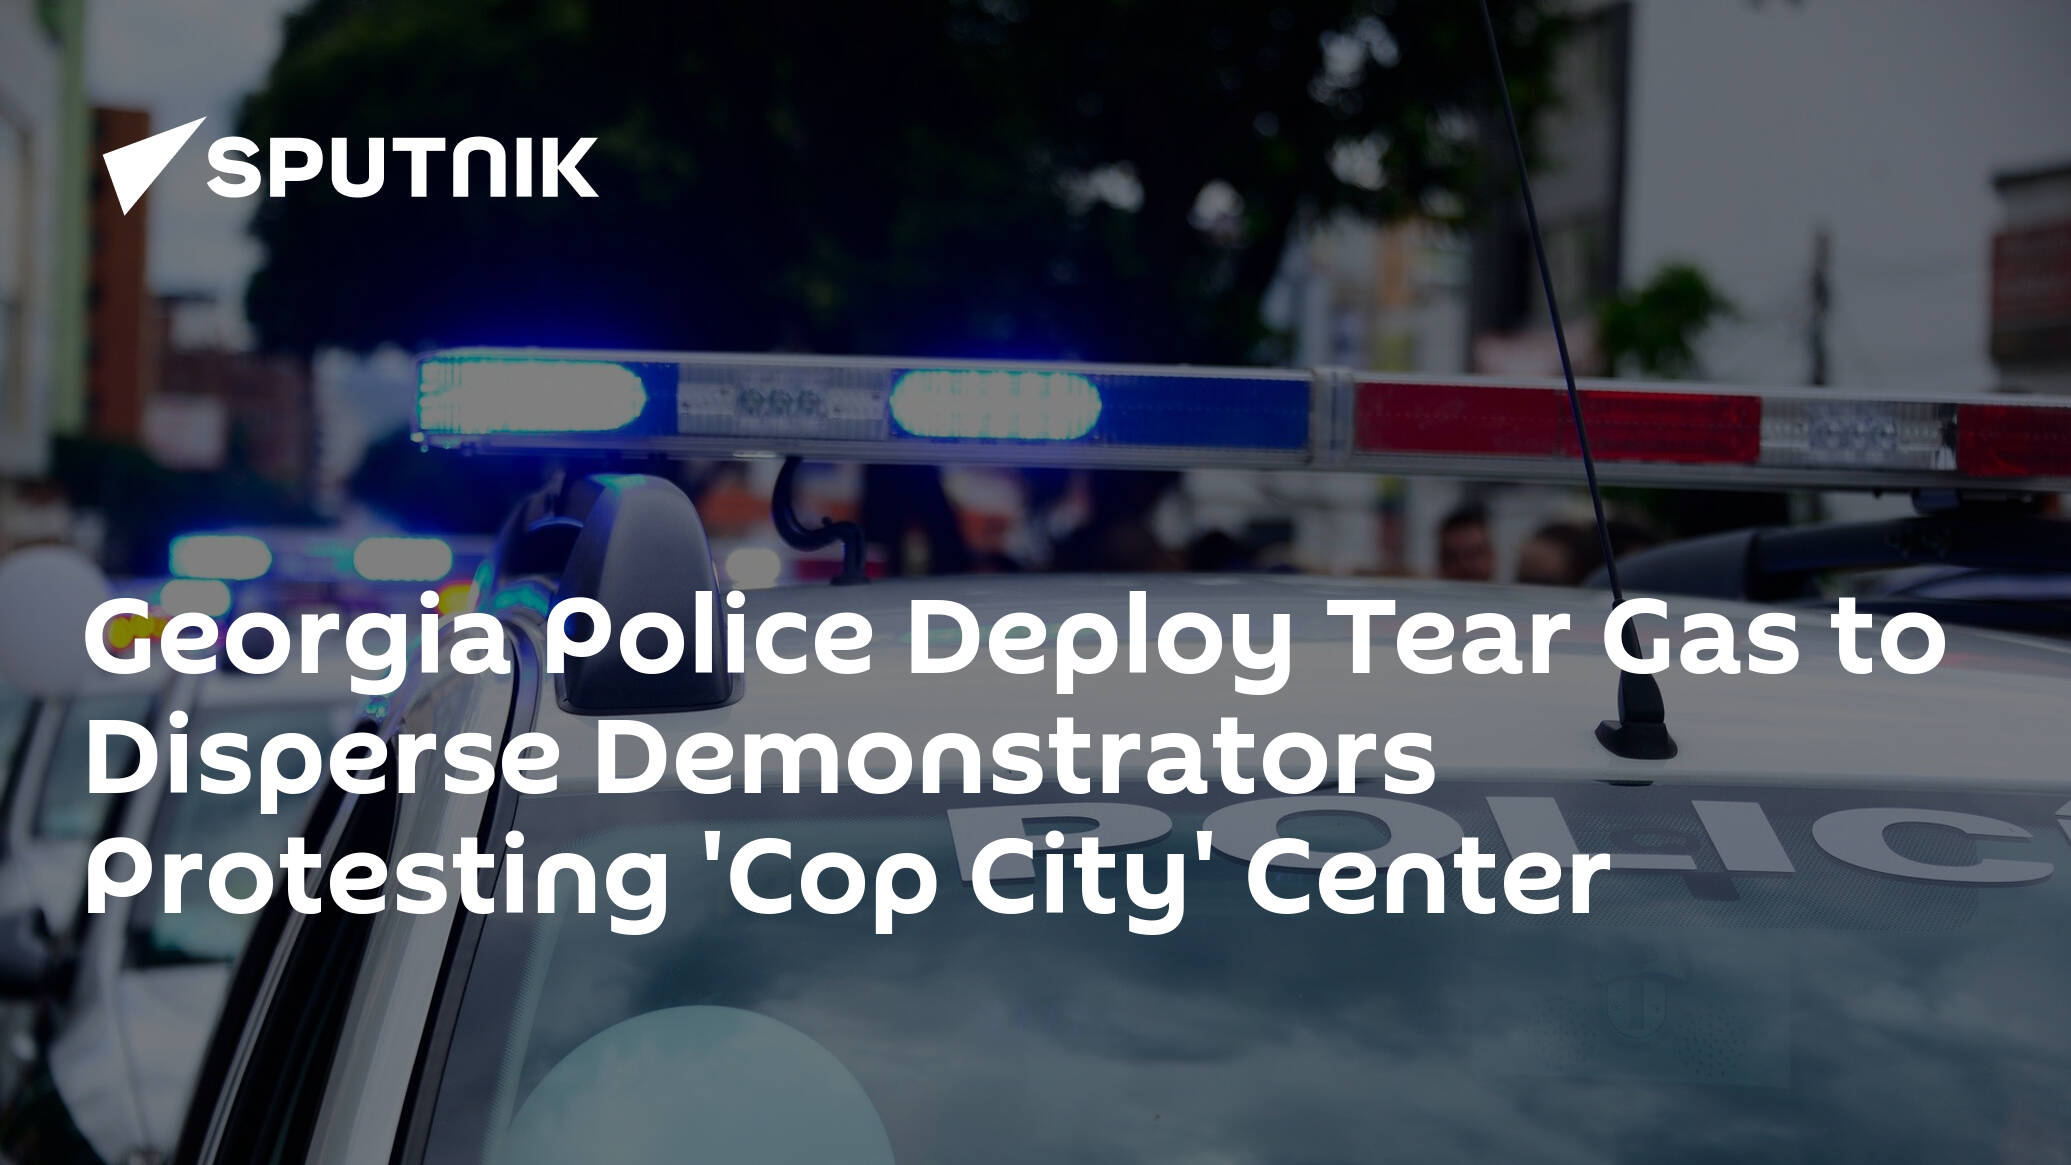 Georgia Police Deploy Tear Gas to Disperse Demonstrators Protesting 'Cop City' Center